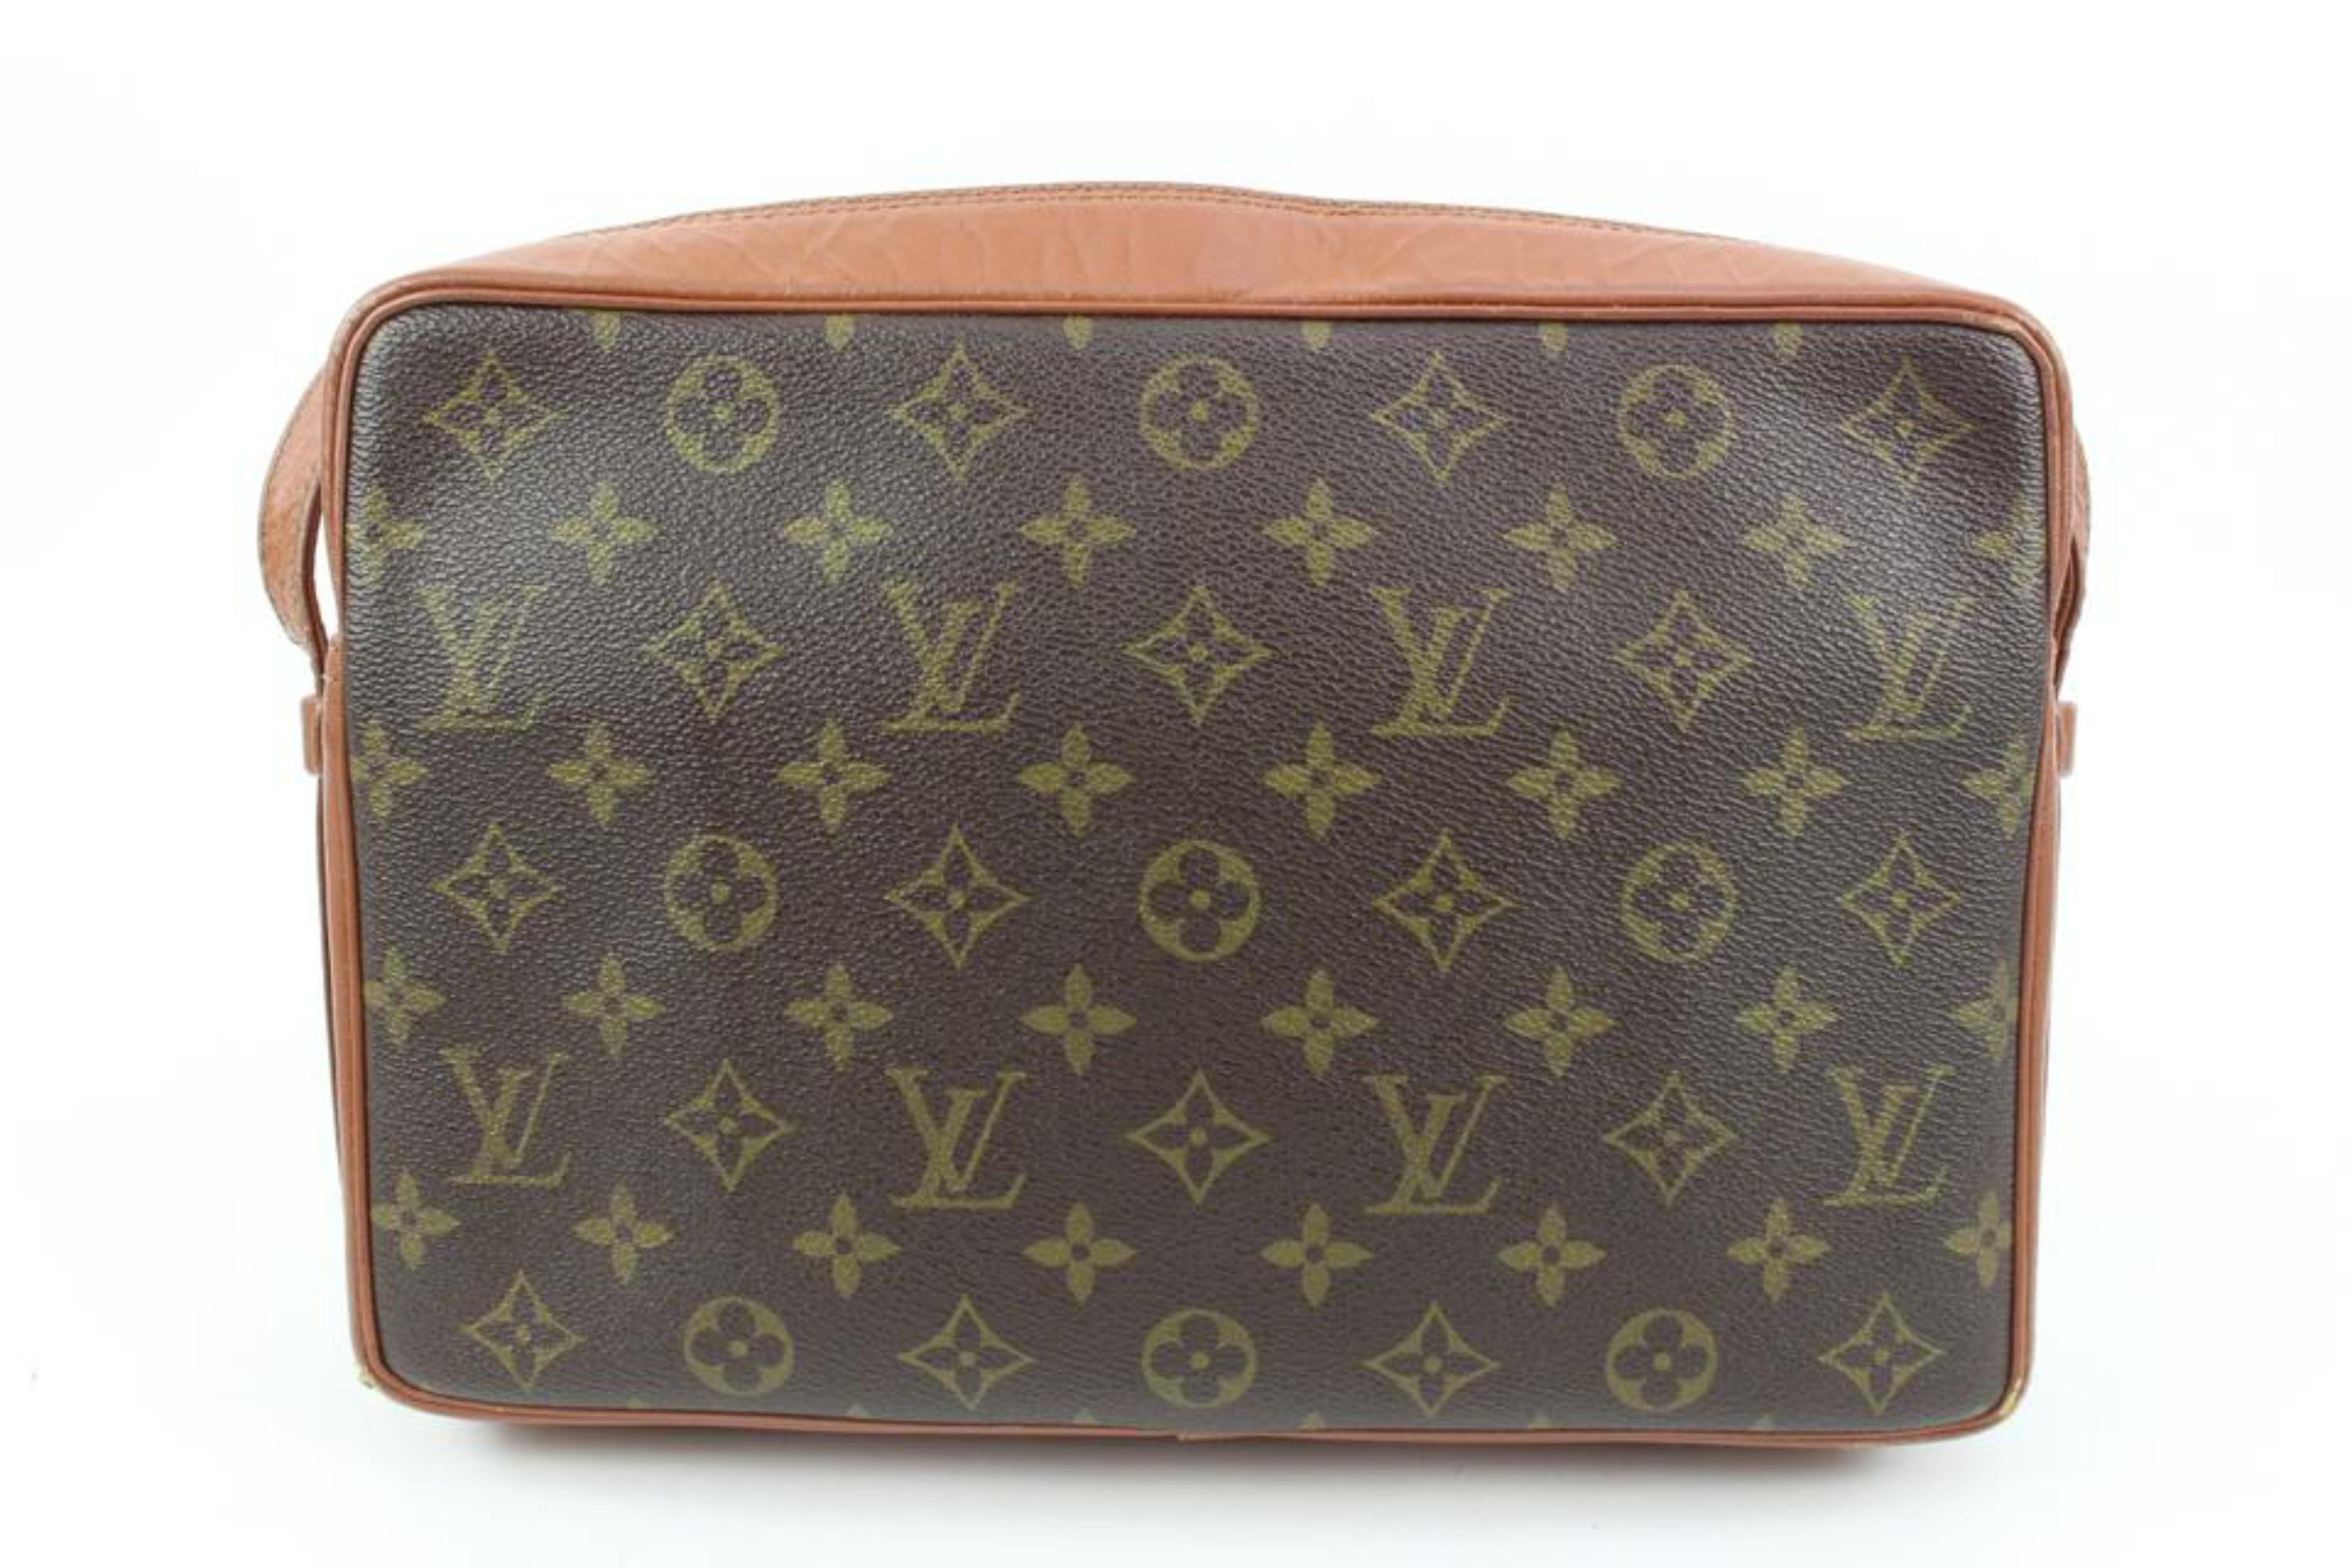 Louis Vuitton Rare Monogram Sac Bandouliere Crossbody Bag 119lv52 In Good Condition In Dix hills, NY